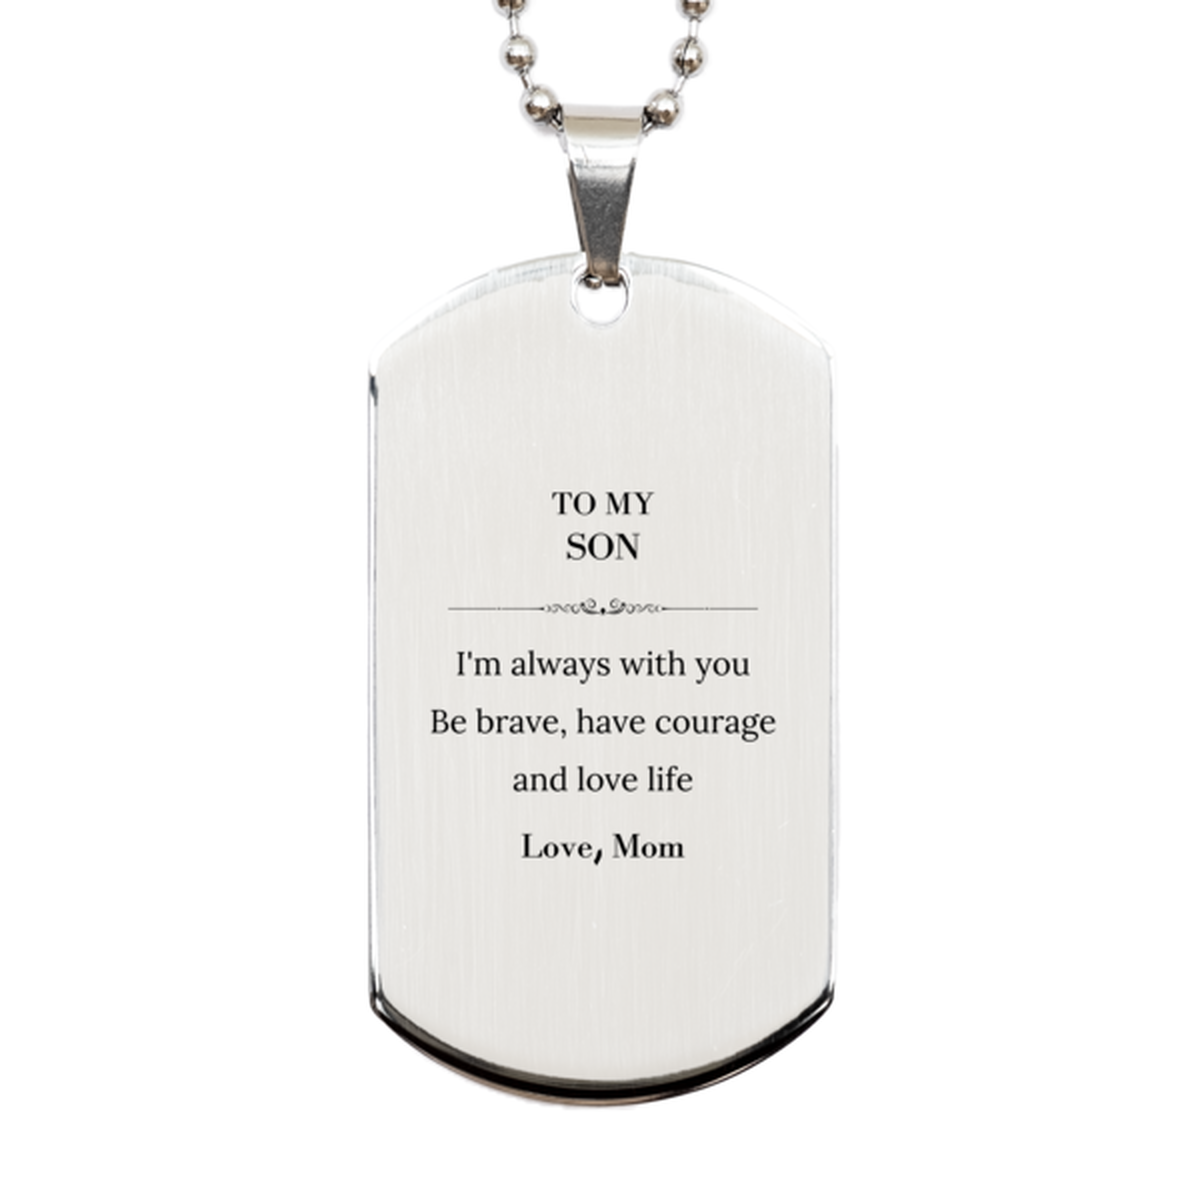 To My Son Gifts from Mom, Unique Silver Dog Tag Inspirational Christmas Birthday Graduation Gifts for Son I'm always with you. Be brave, have courage and love life. Love, Mom